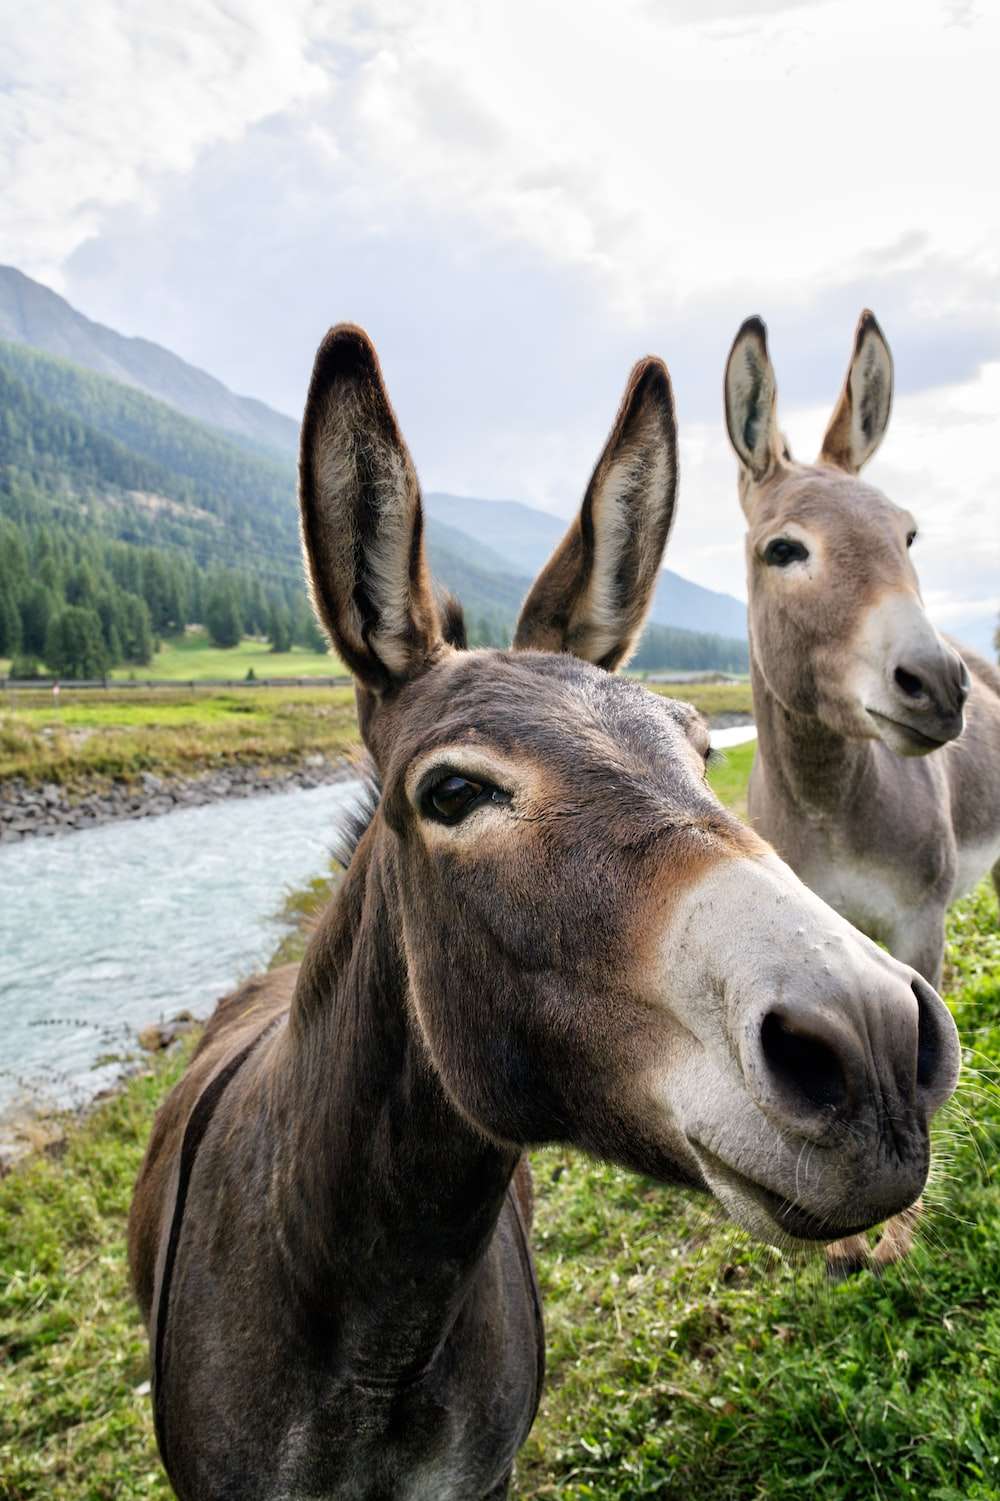 Donkey wallpaper for iphone 14 10